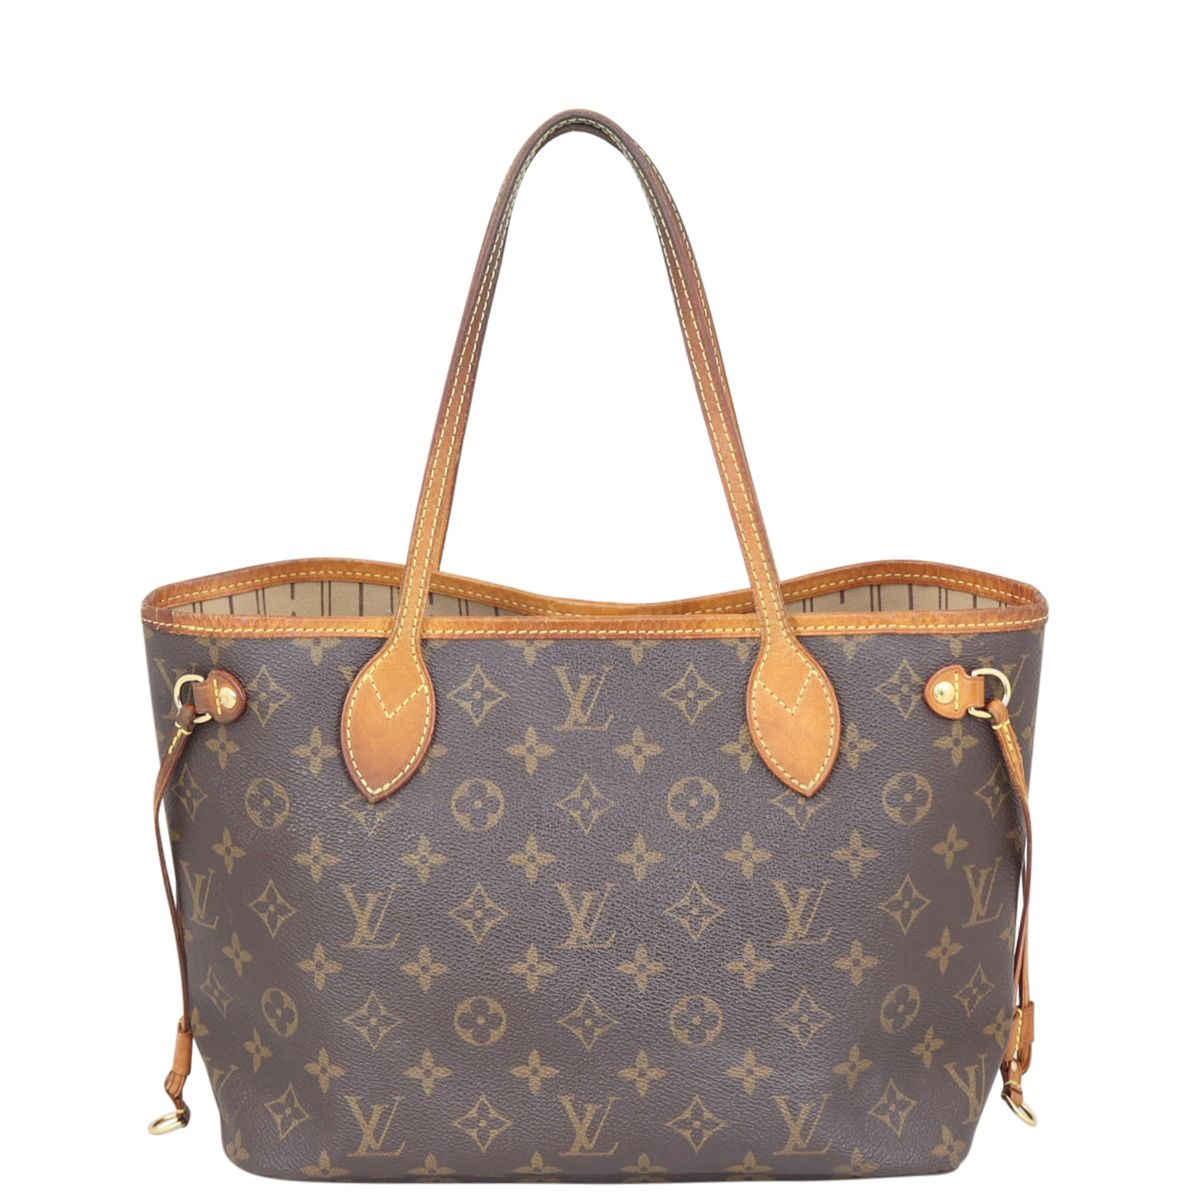 Lv Neverfull Pm (smallest size)